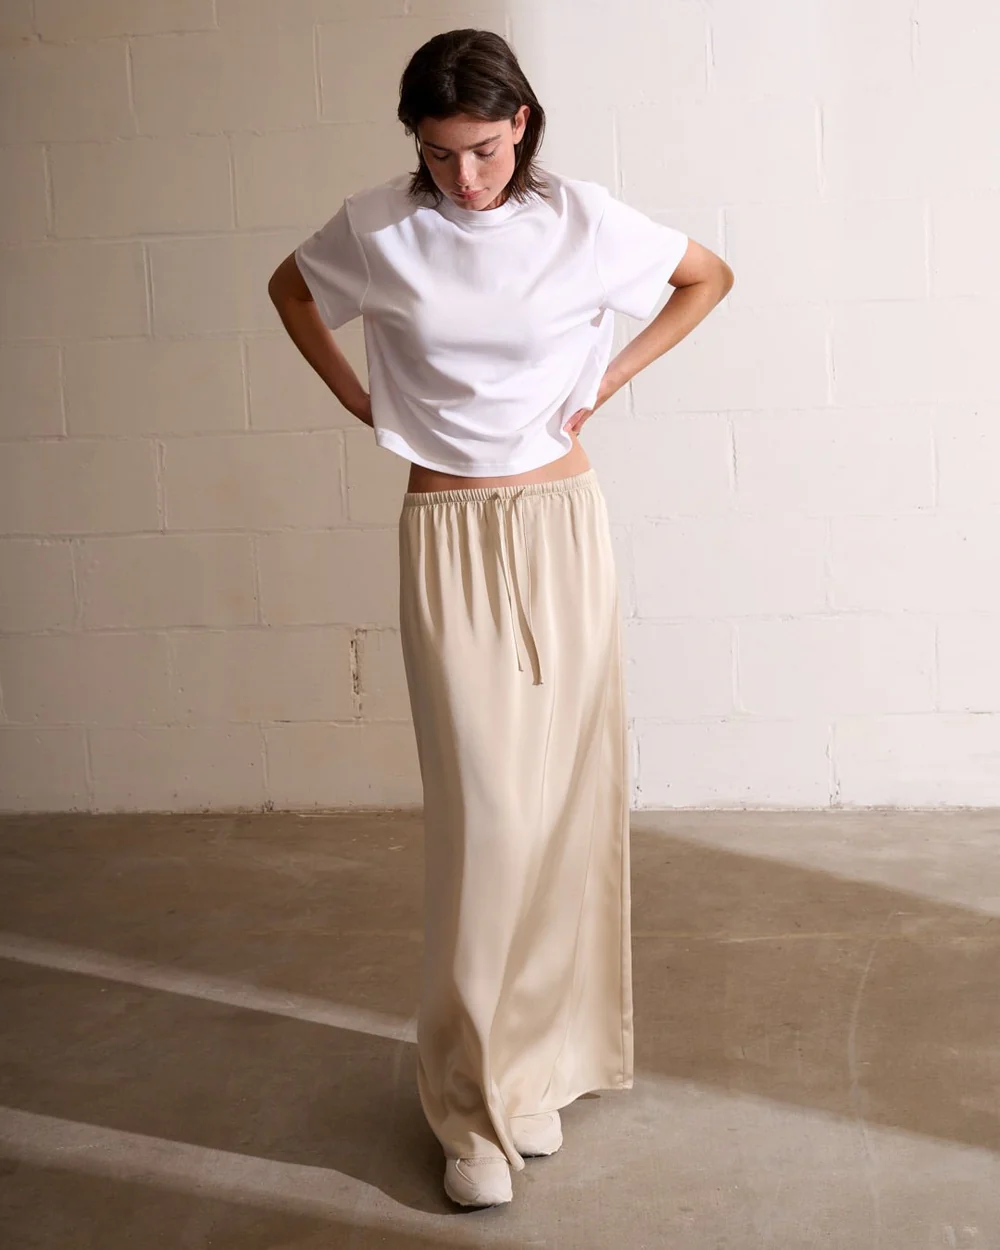 Isa Parchment Skirt